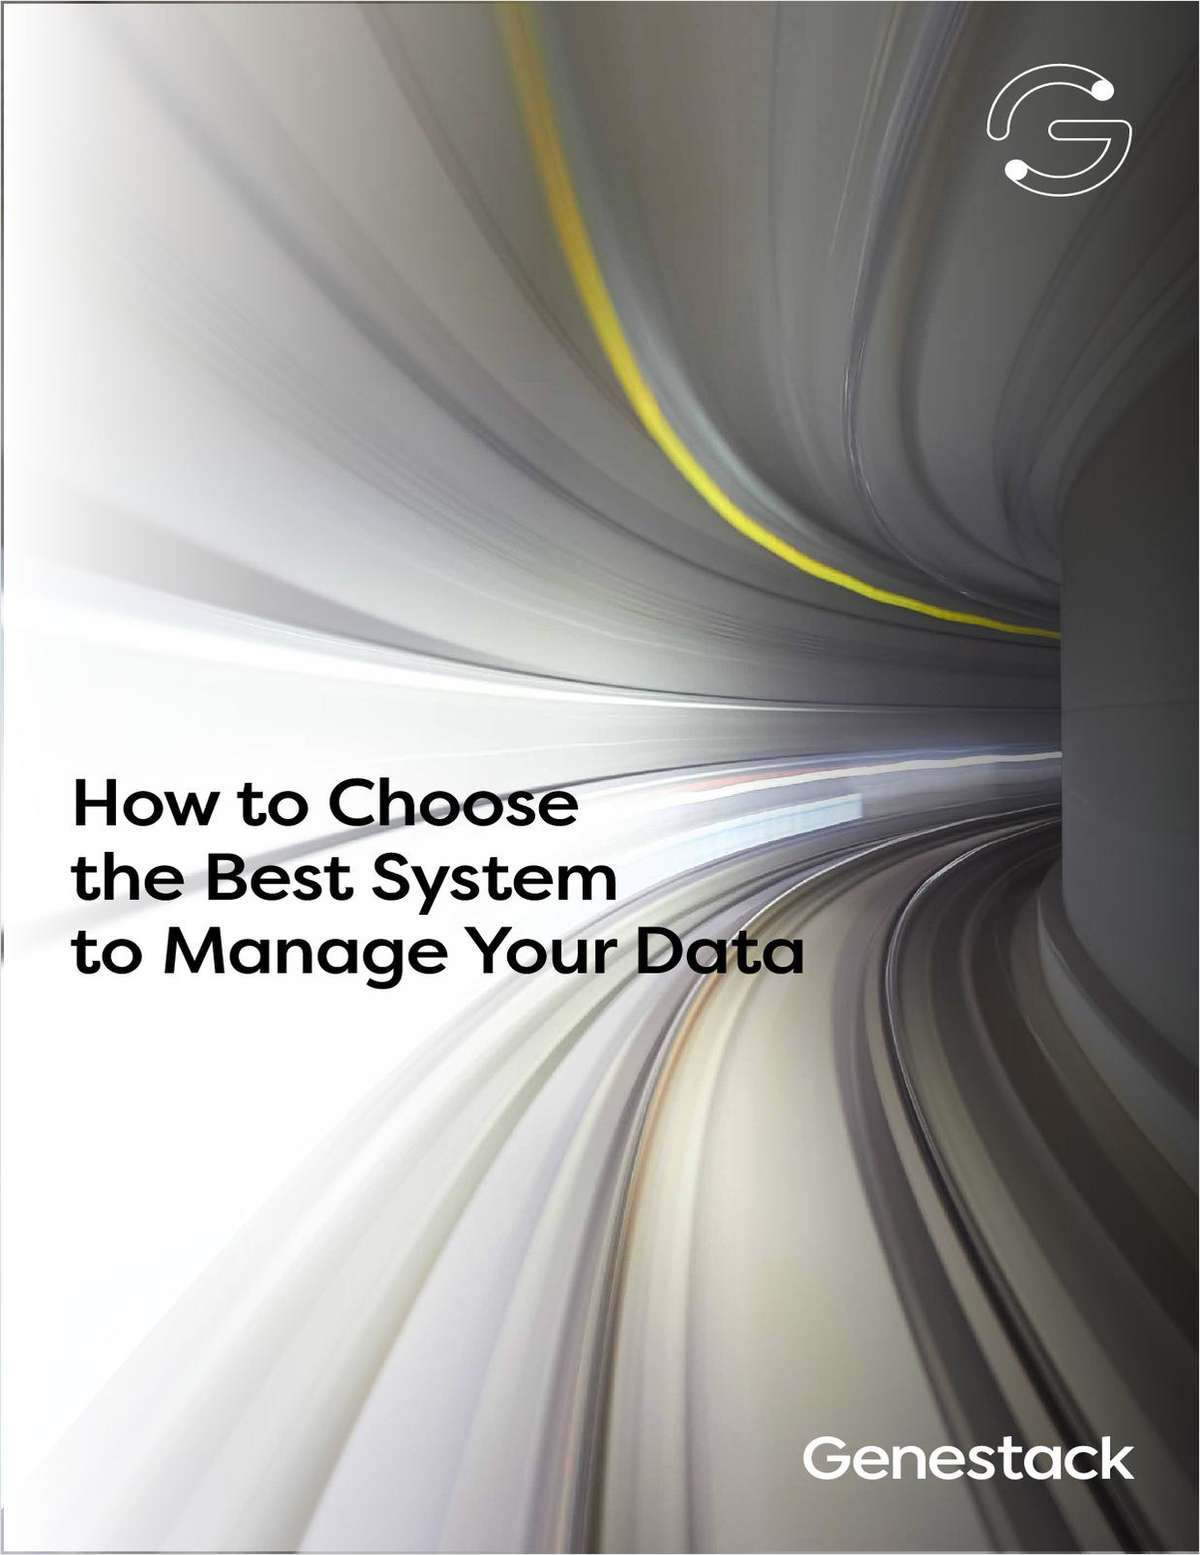 How to choose the best system to manage your data